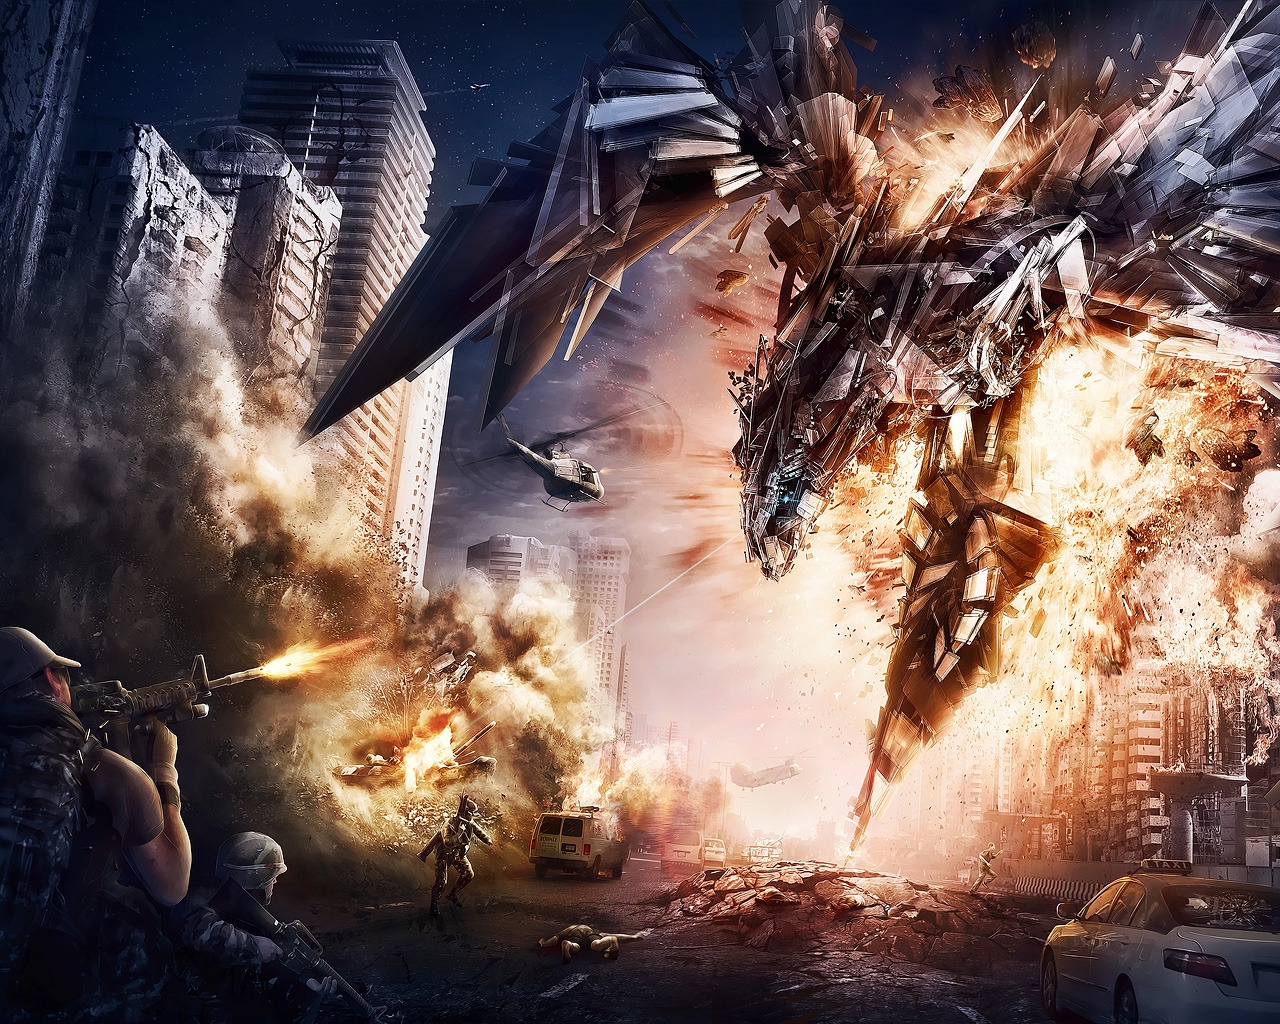 Transformers 4 Concept Art for 1280 x 1024 resolution